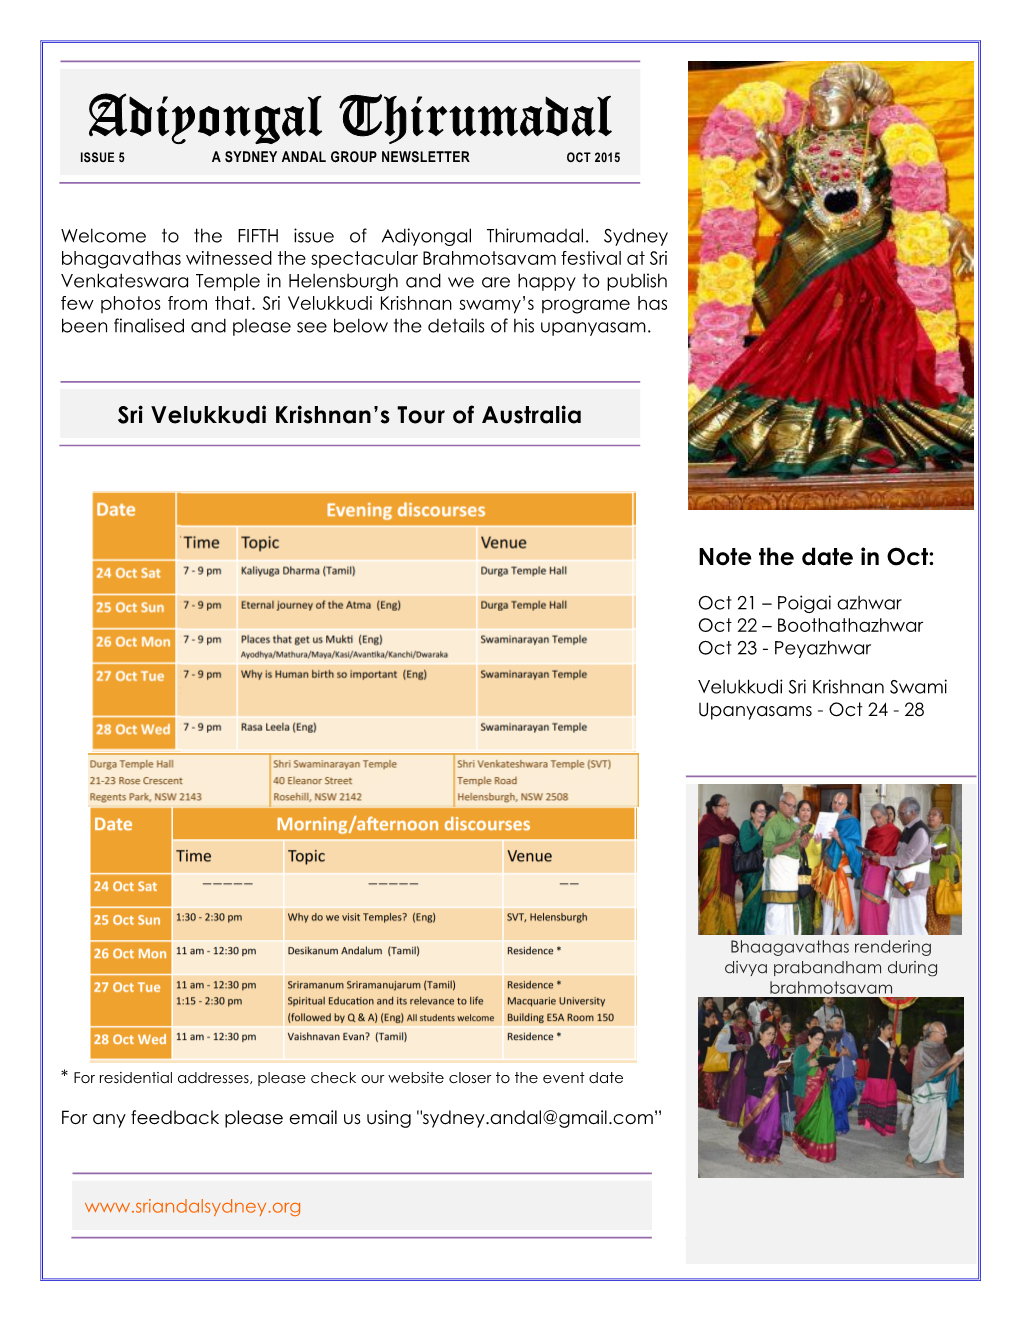 Adiyongal Thirumadal ISSUE 5 a SYDNEY ANDAL GROUP NEWSLETTER OCT 2015